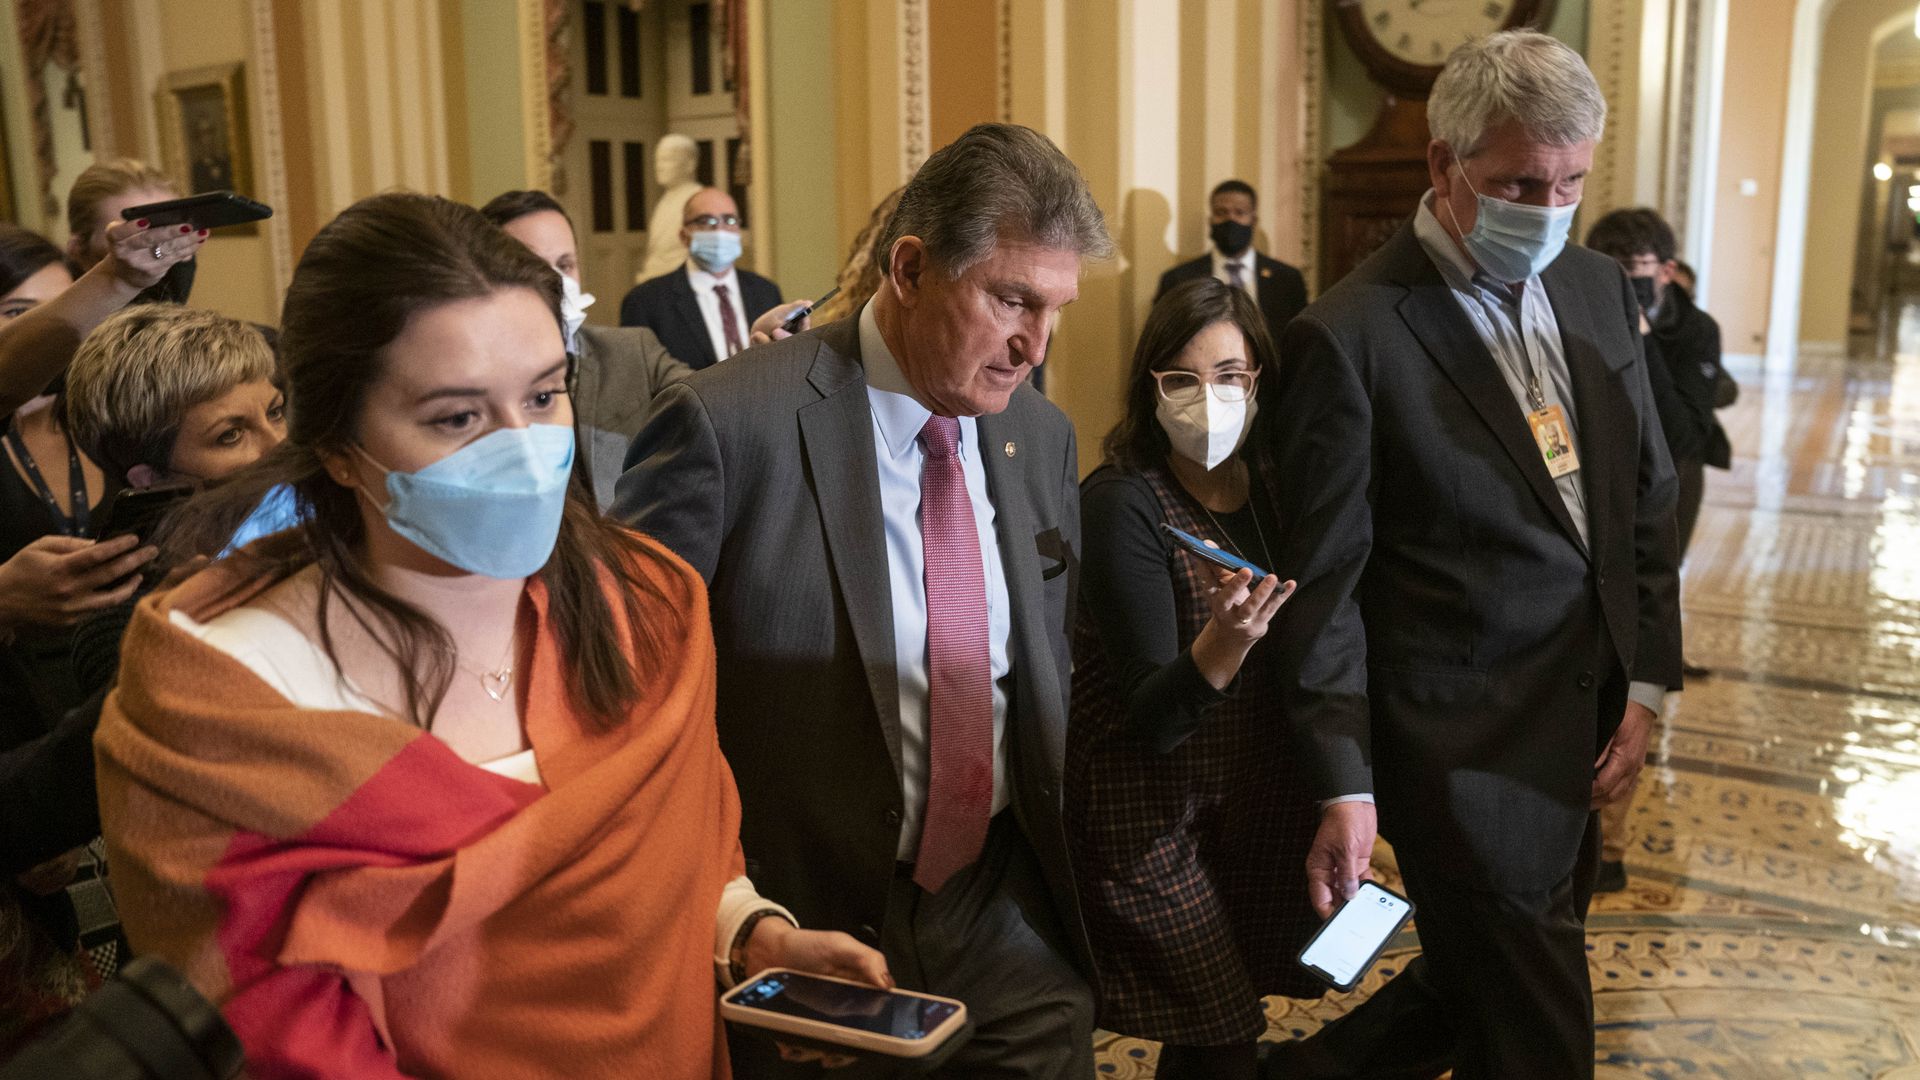 Sen. Joe Manchin is seen being trailed by reporters as he walks through the Capitol on Tuesday.